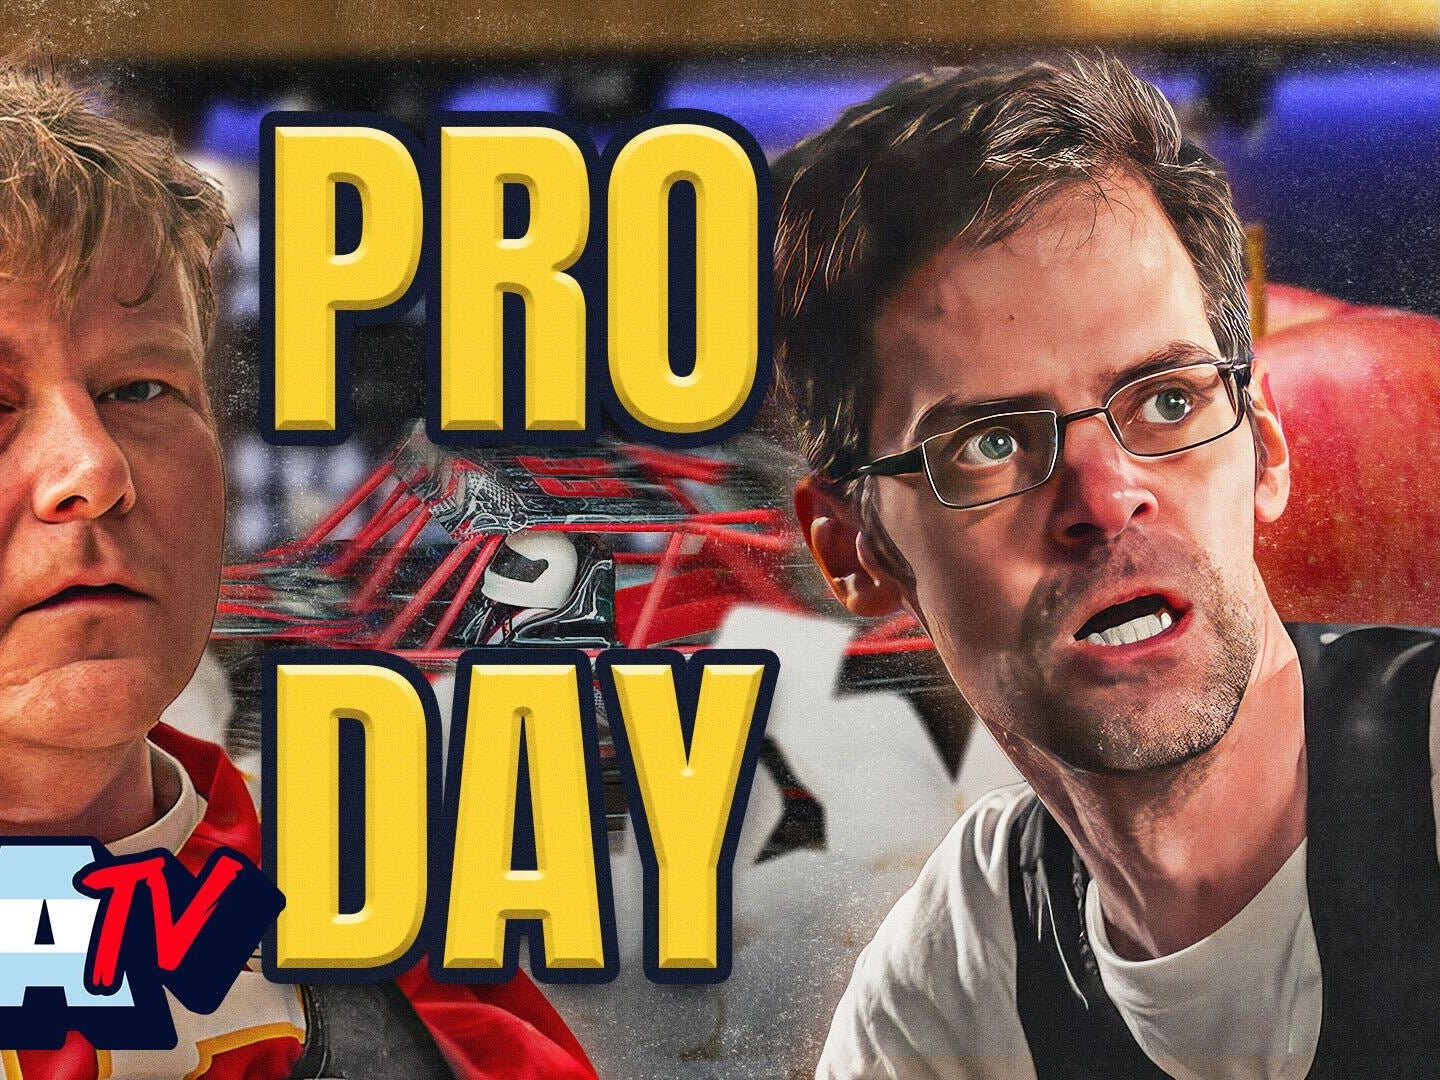 Rivals Face Off In CHAOTIC Pro Day Challenge | VIVA TV